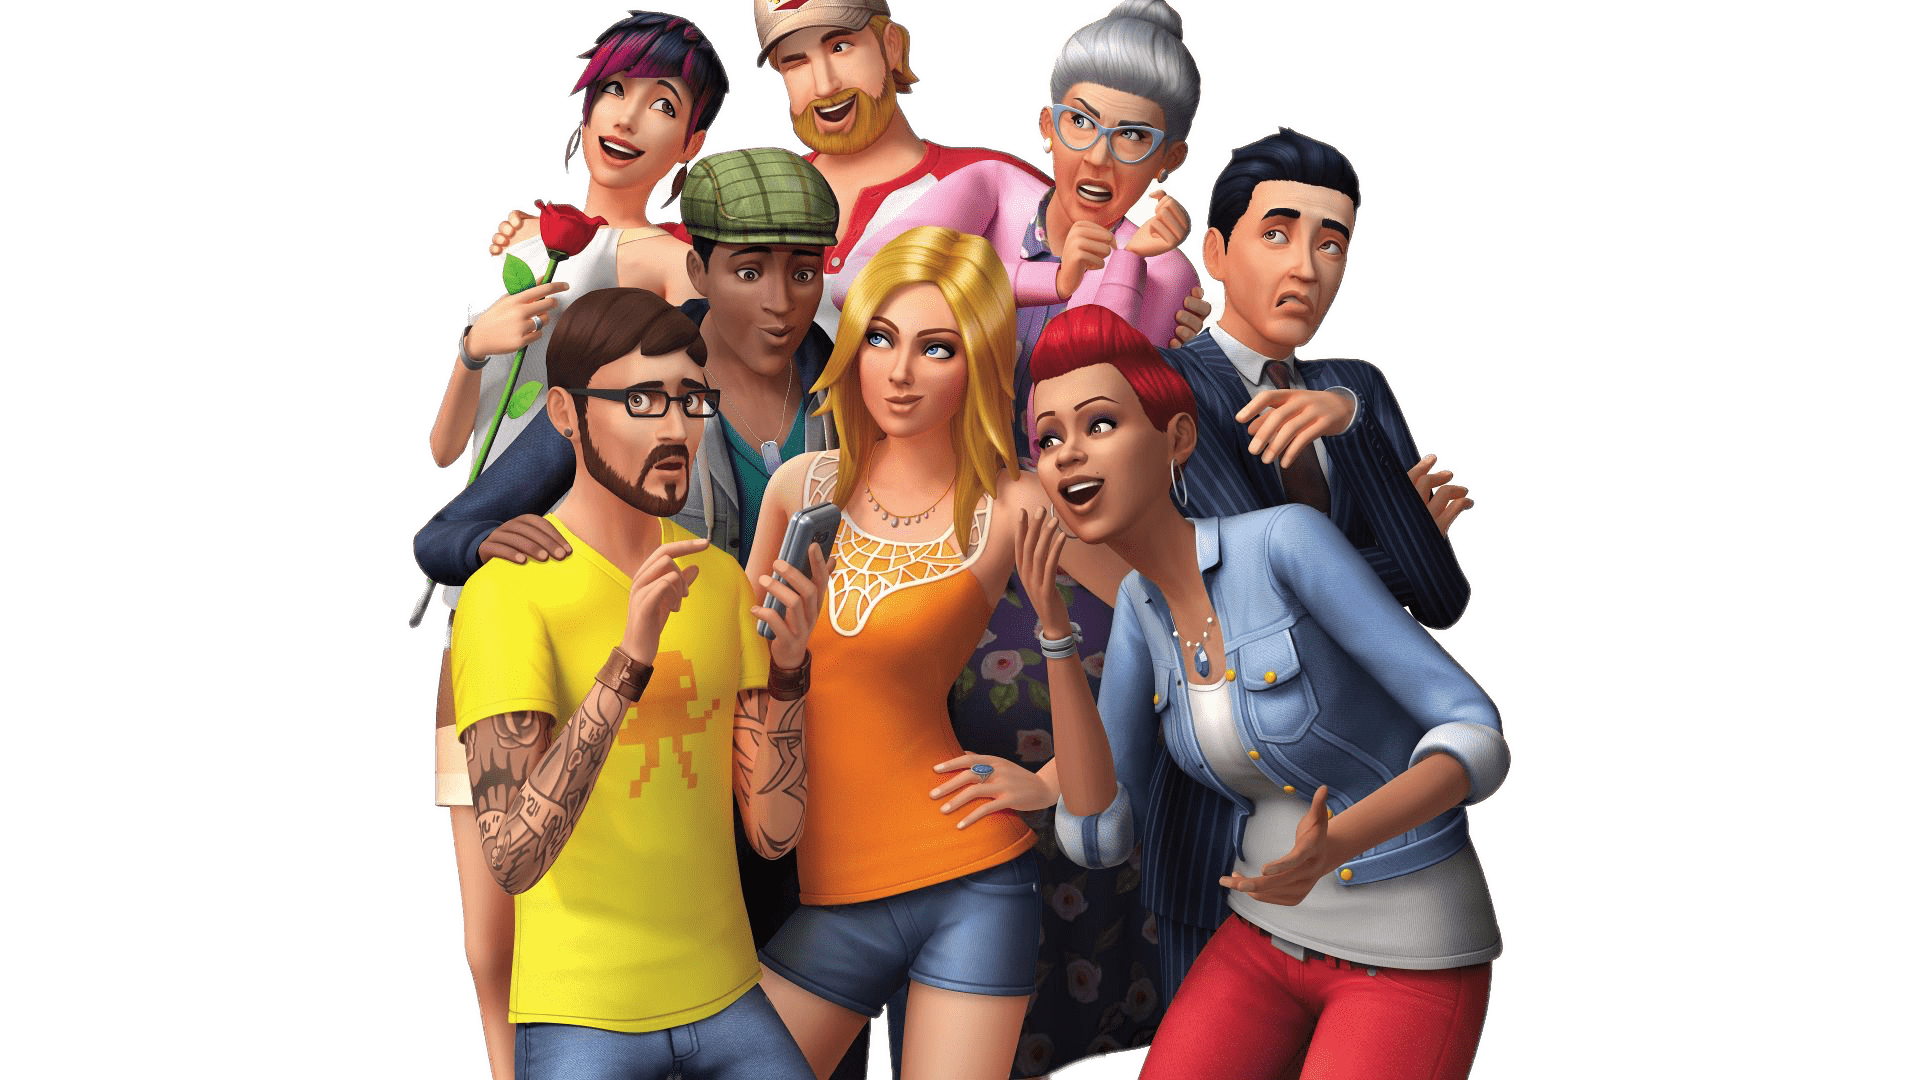 Download PNG image - The Sims Characters PNG Pic 